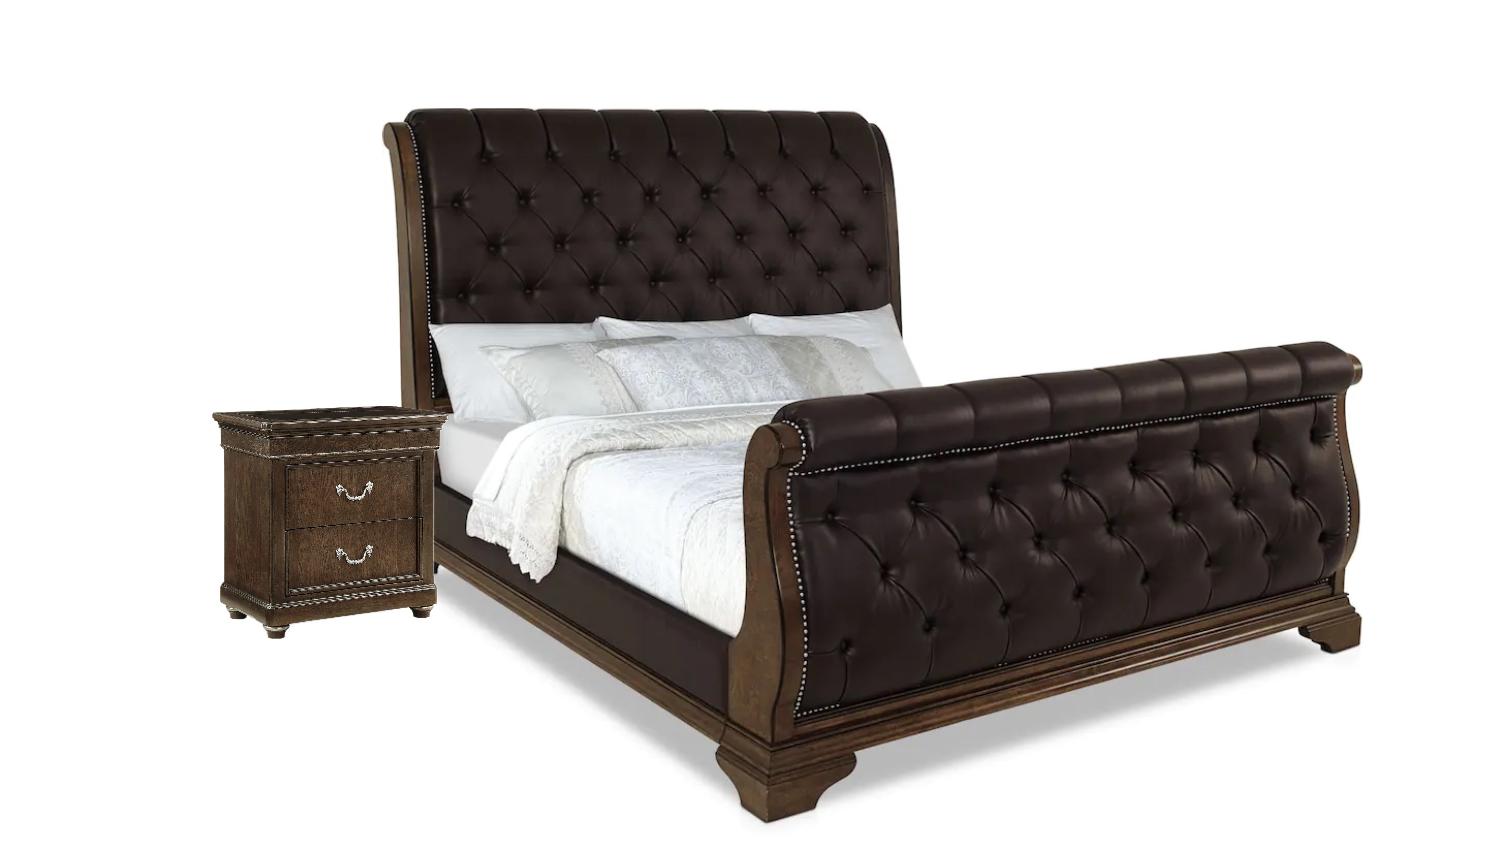 Modern, Transitional Sleigh Bedroom Set Belmont Mahogany 275146-2316-BR-2N-3PCS in Brown Fabric